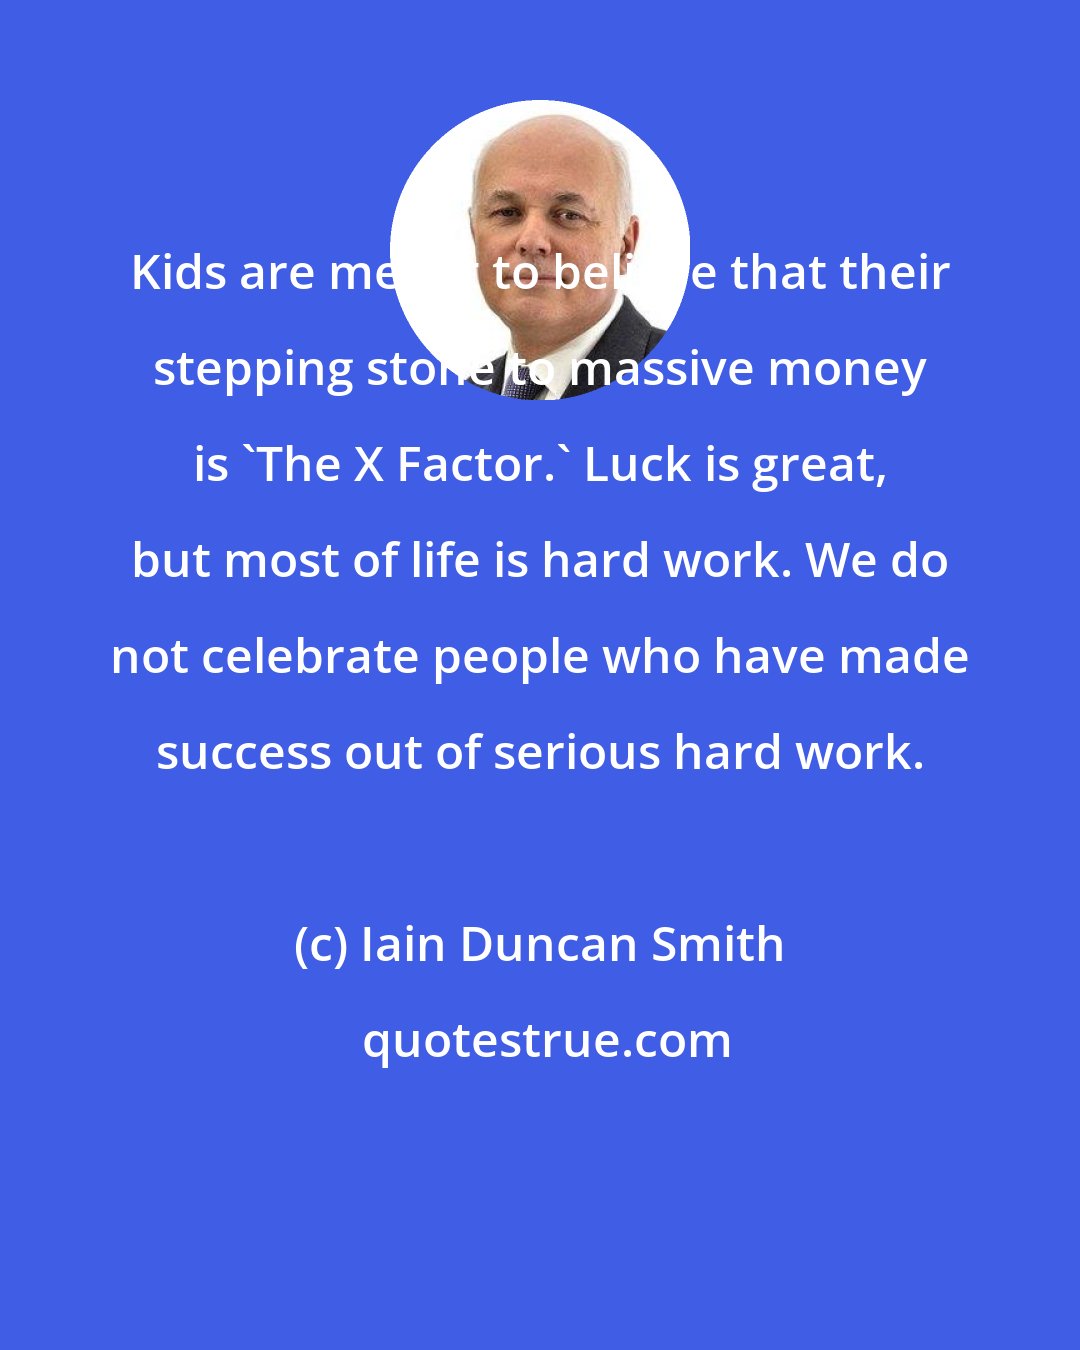 Iain Duncan Smith: Kids are meant to believe that their stepping stone to massive money is 'The X Factor.' Luck is great, but most of life is hard work. We do not celebrate people who have made success out of serious hard work.